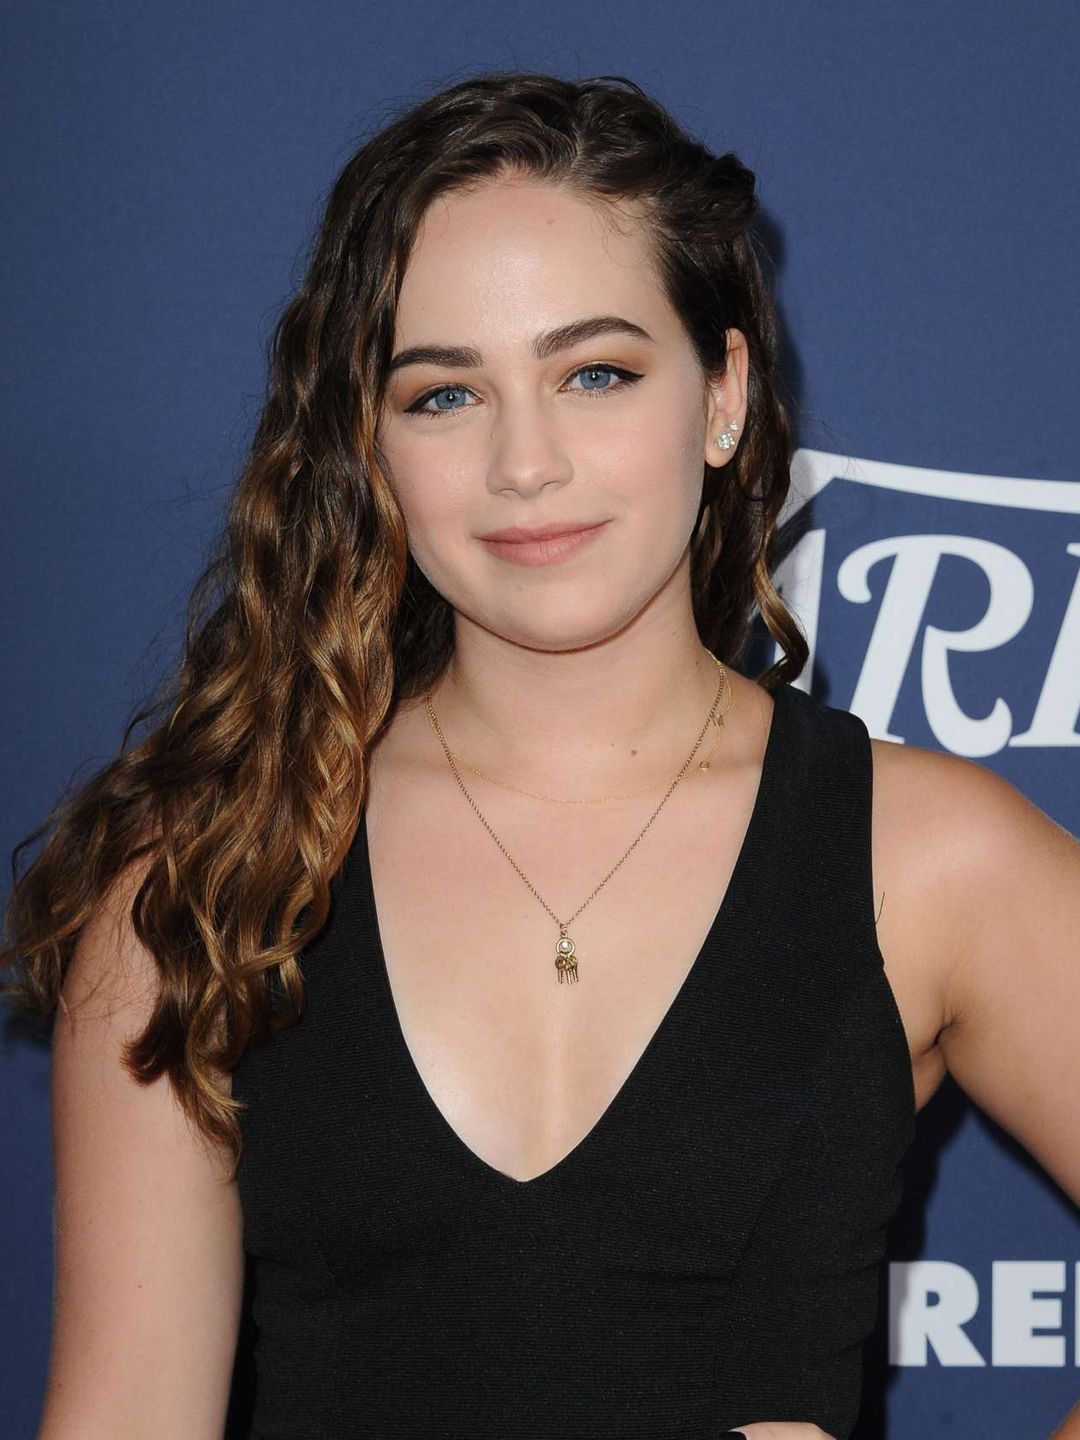 Mary Mouser where did she study